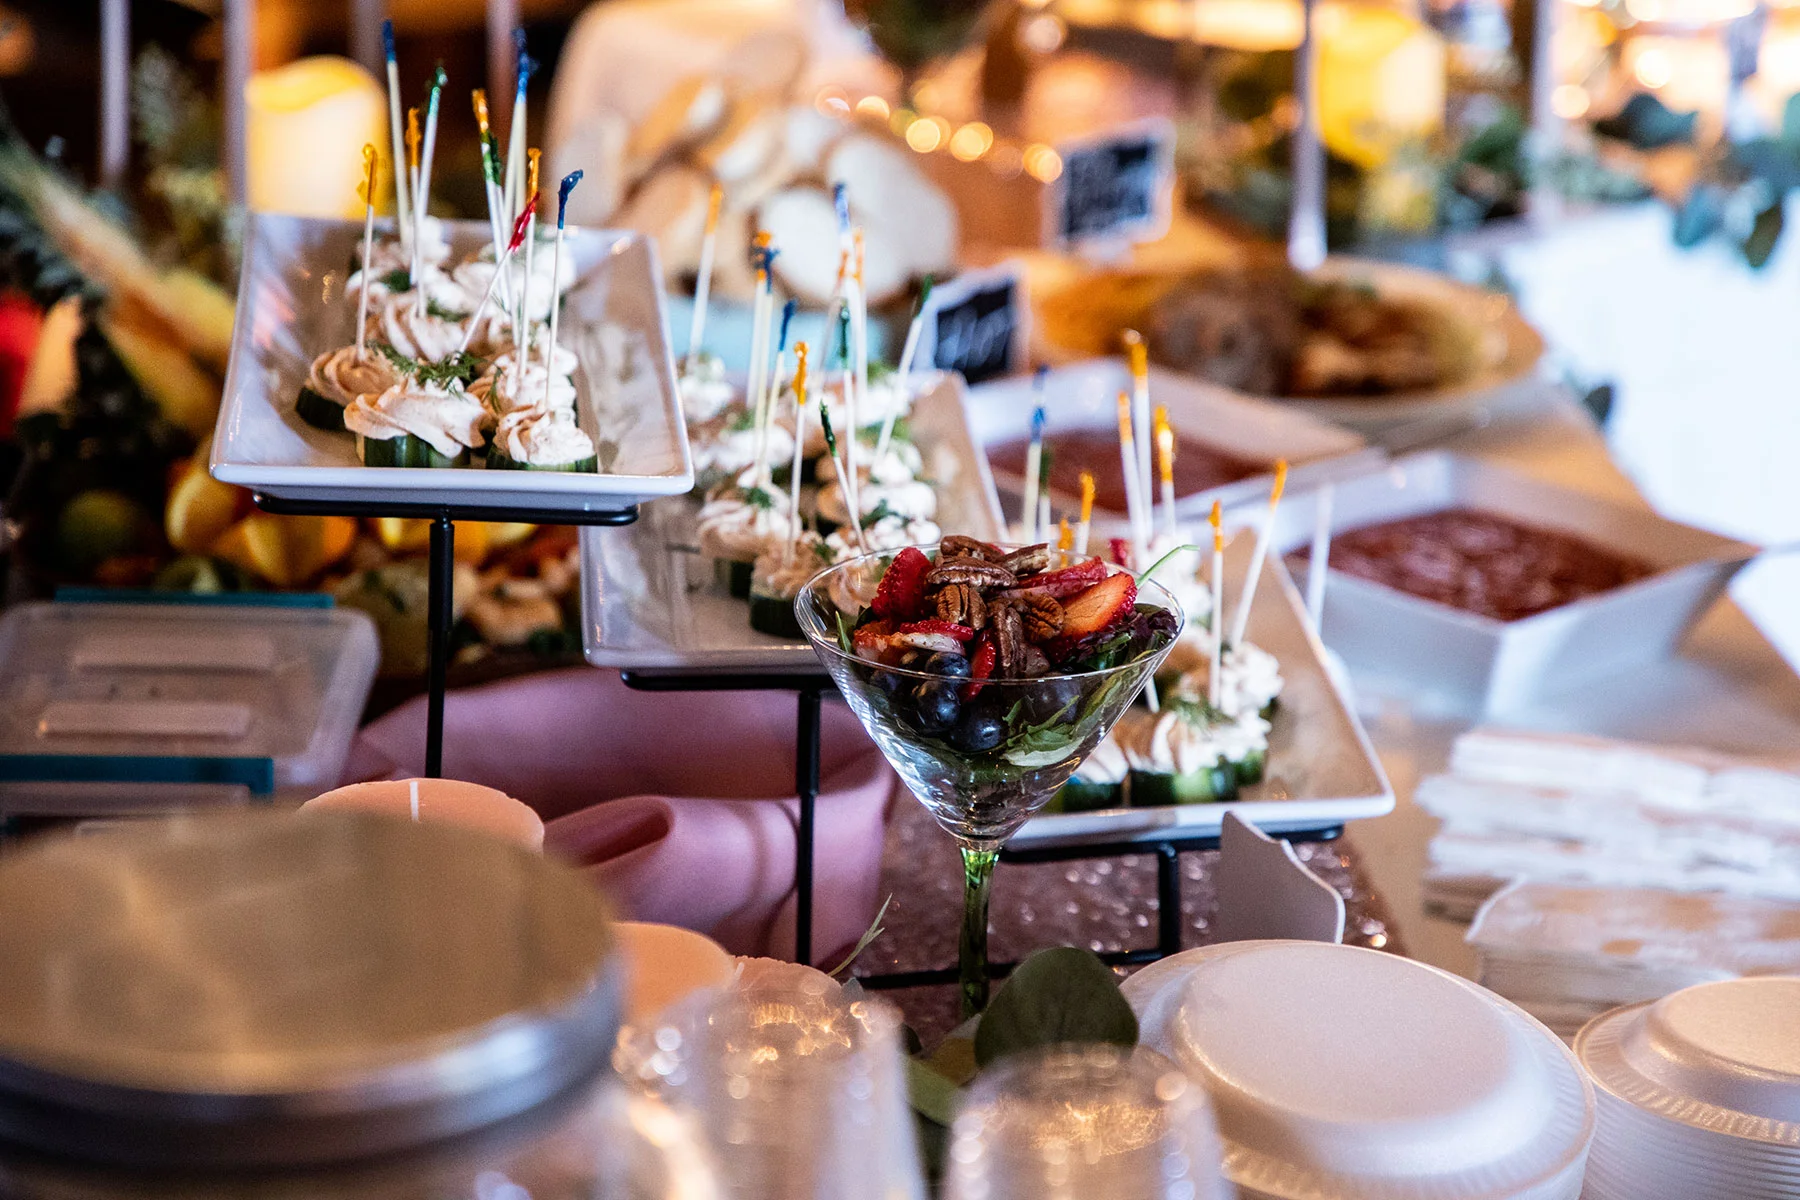 At the Pennsylvania wedding expo, guests will be treated to a lavish buffet table adorned with a tantalizing variety of delectable food options.